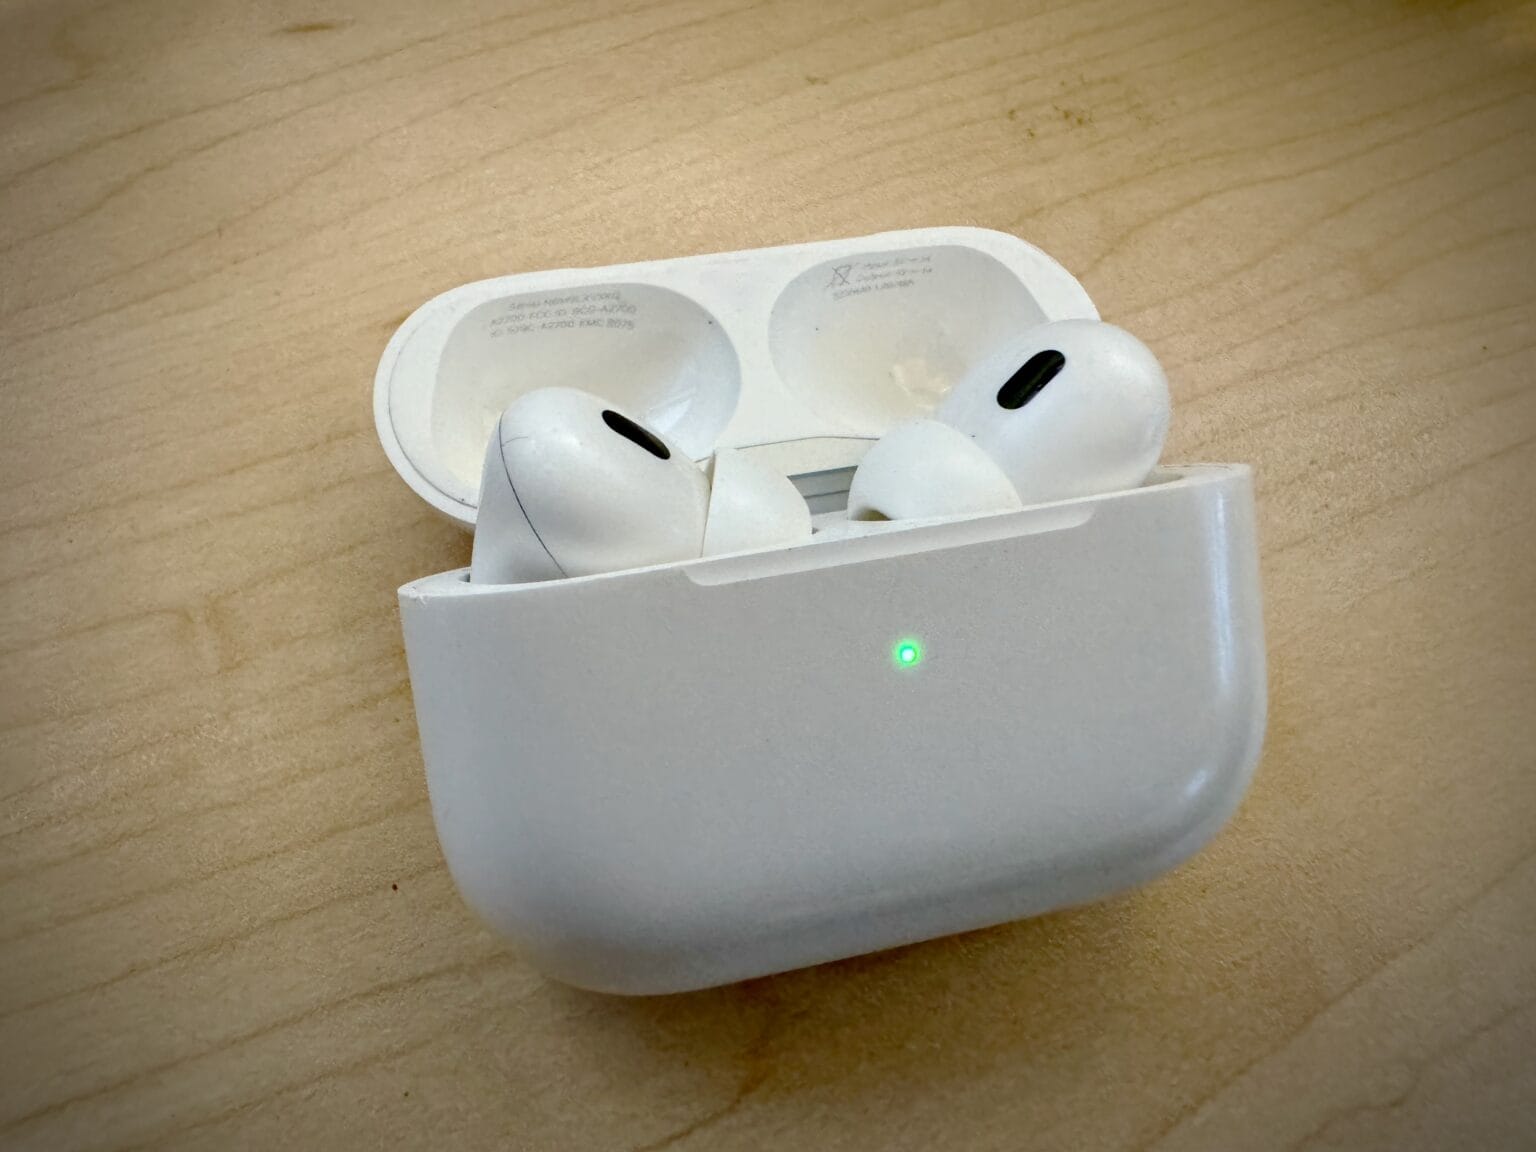 AirPods Pro in an open case.